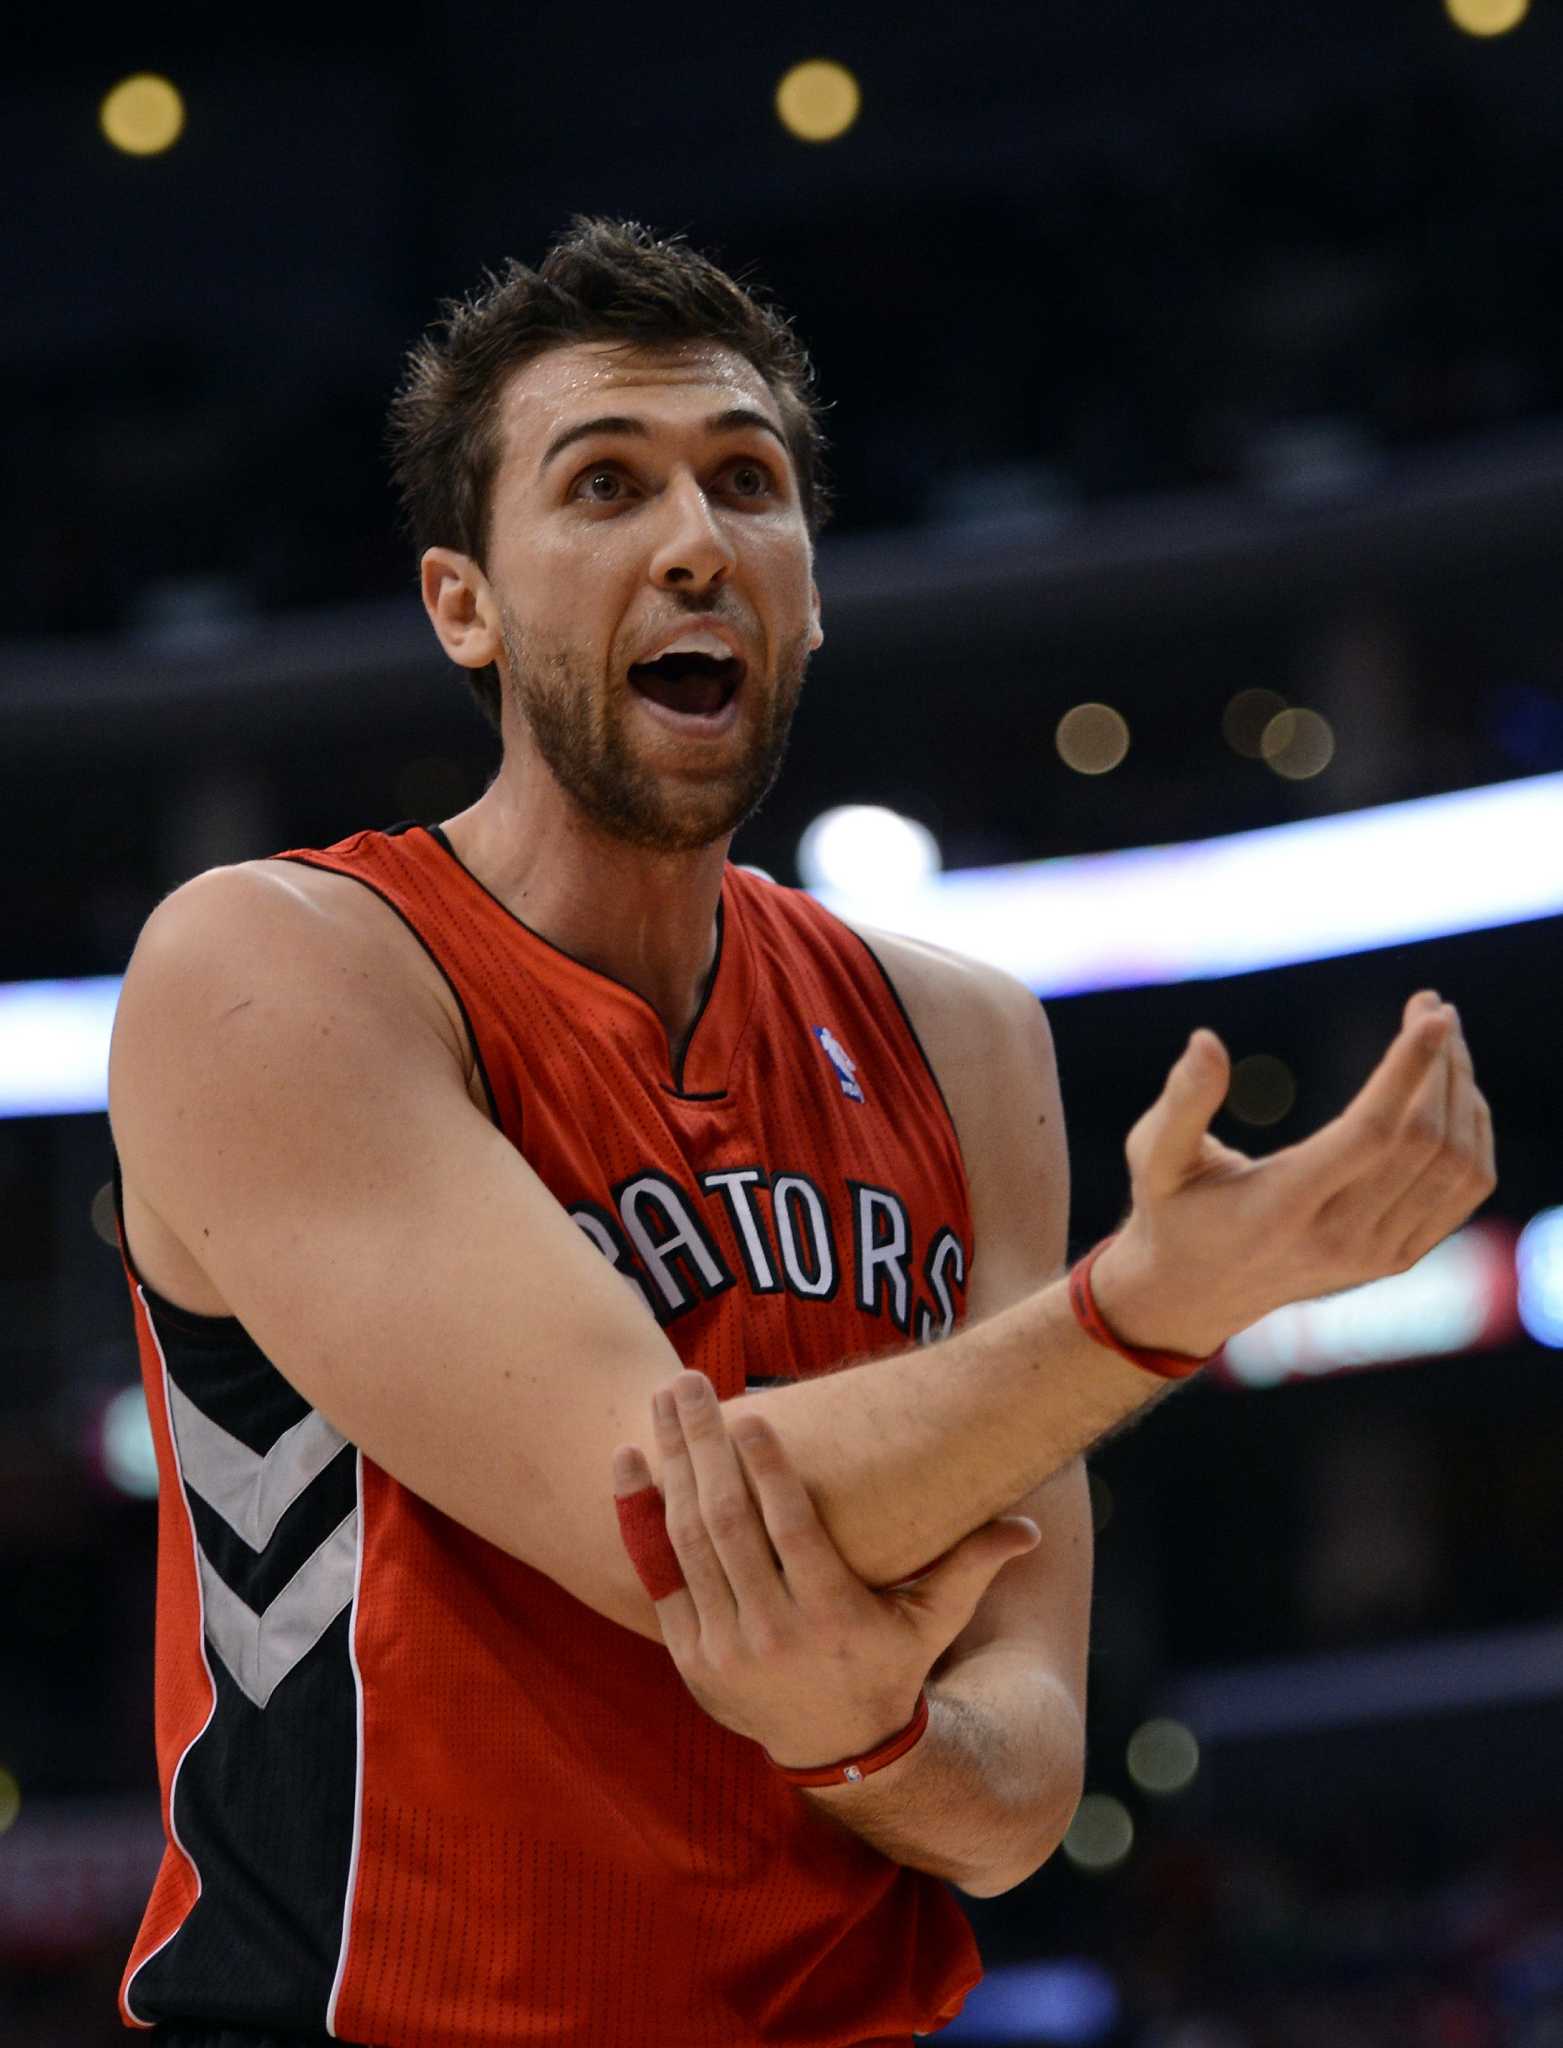 Raptors officially trade Andrea Bargnani to Knicks